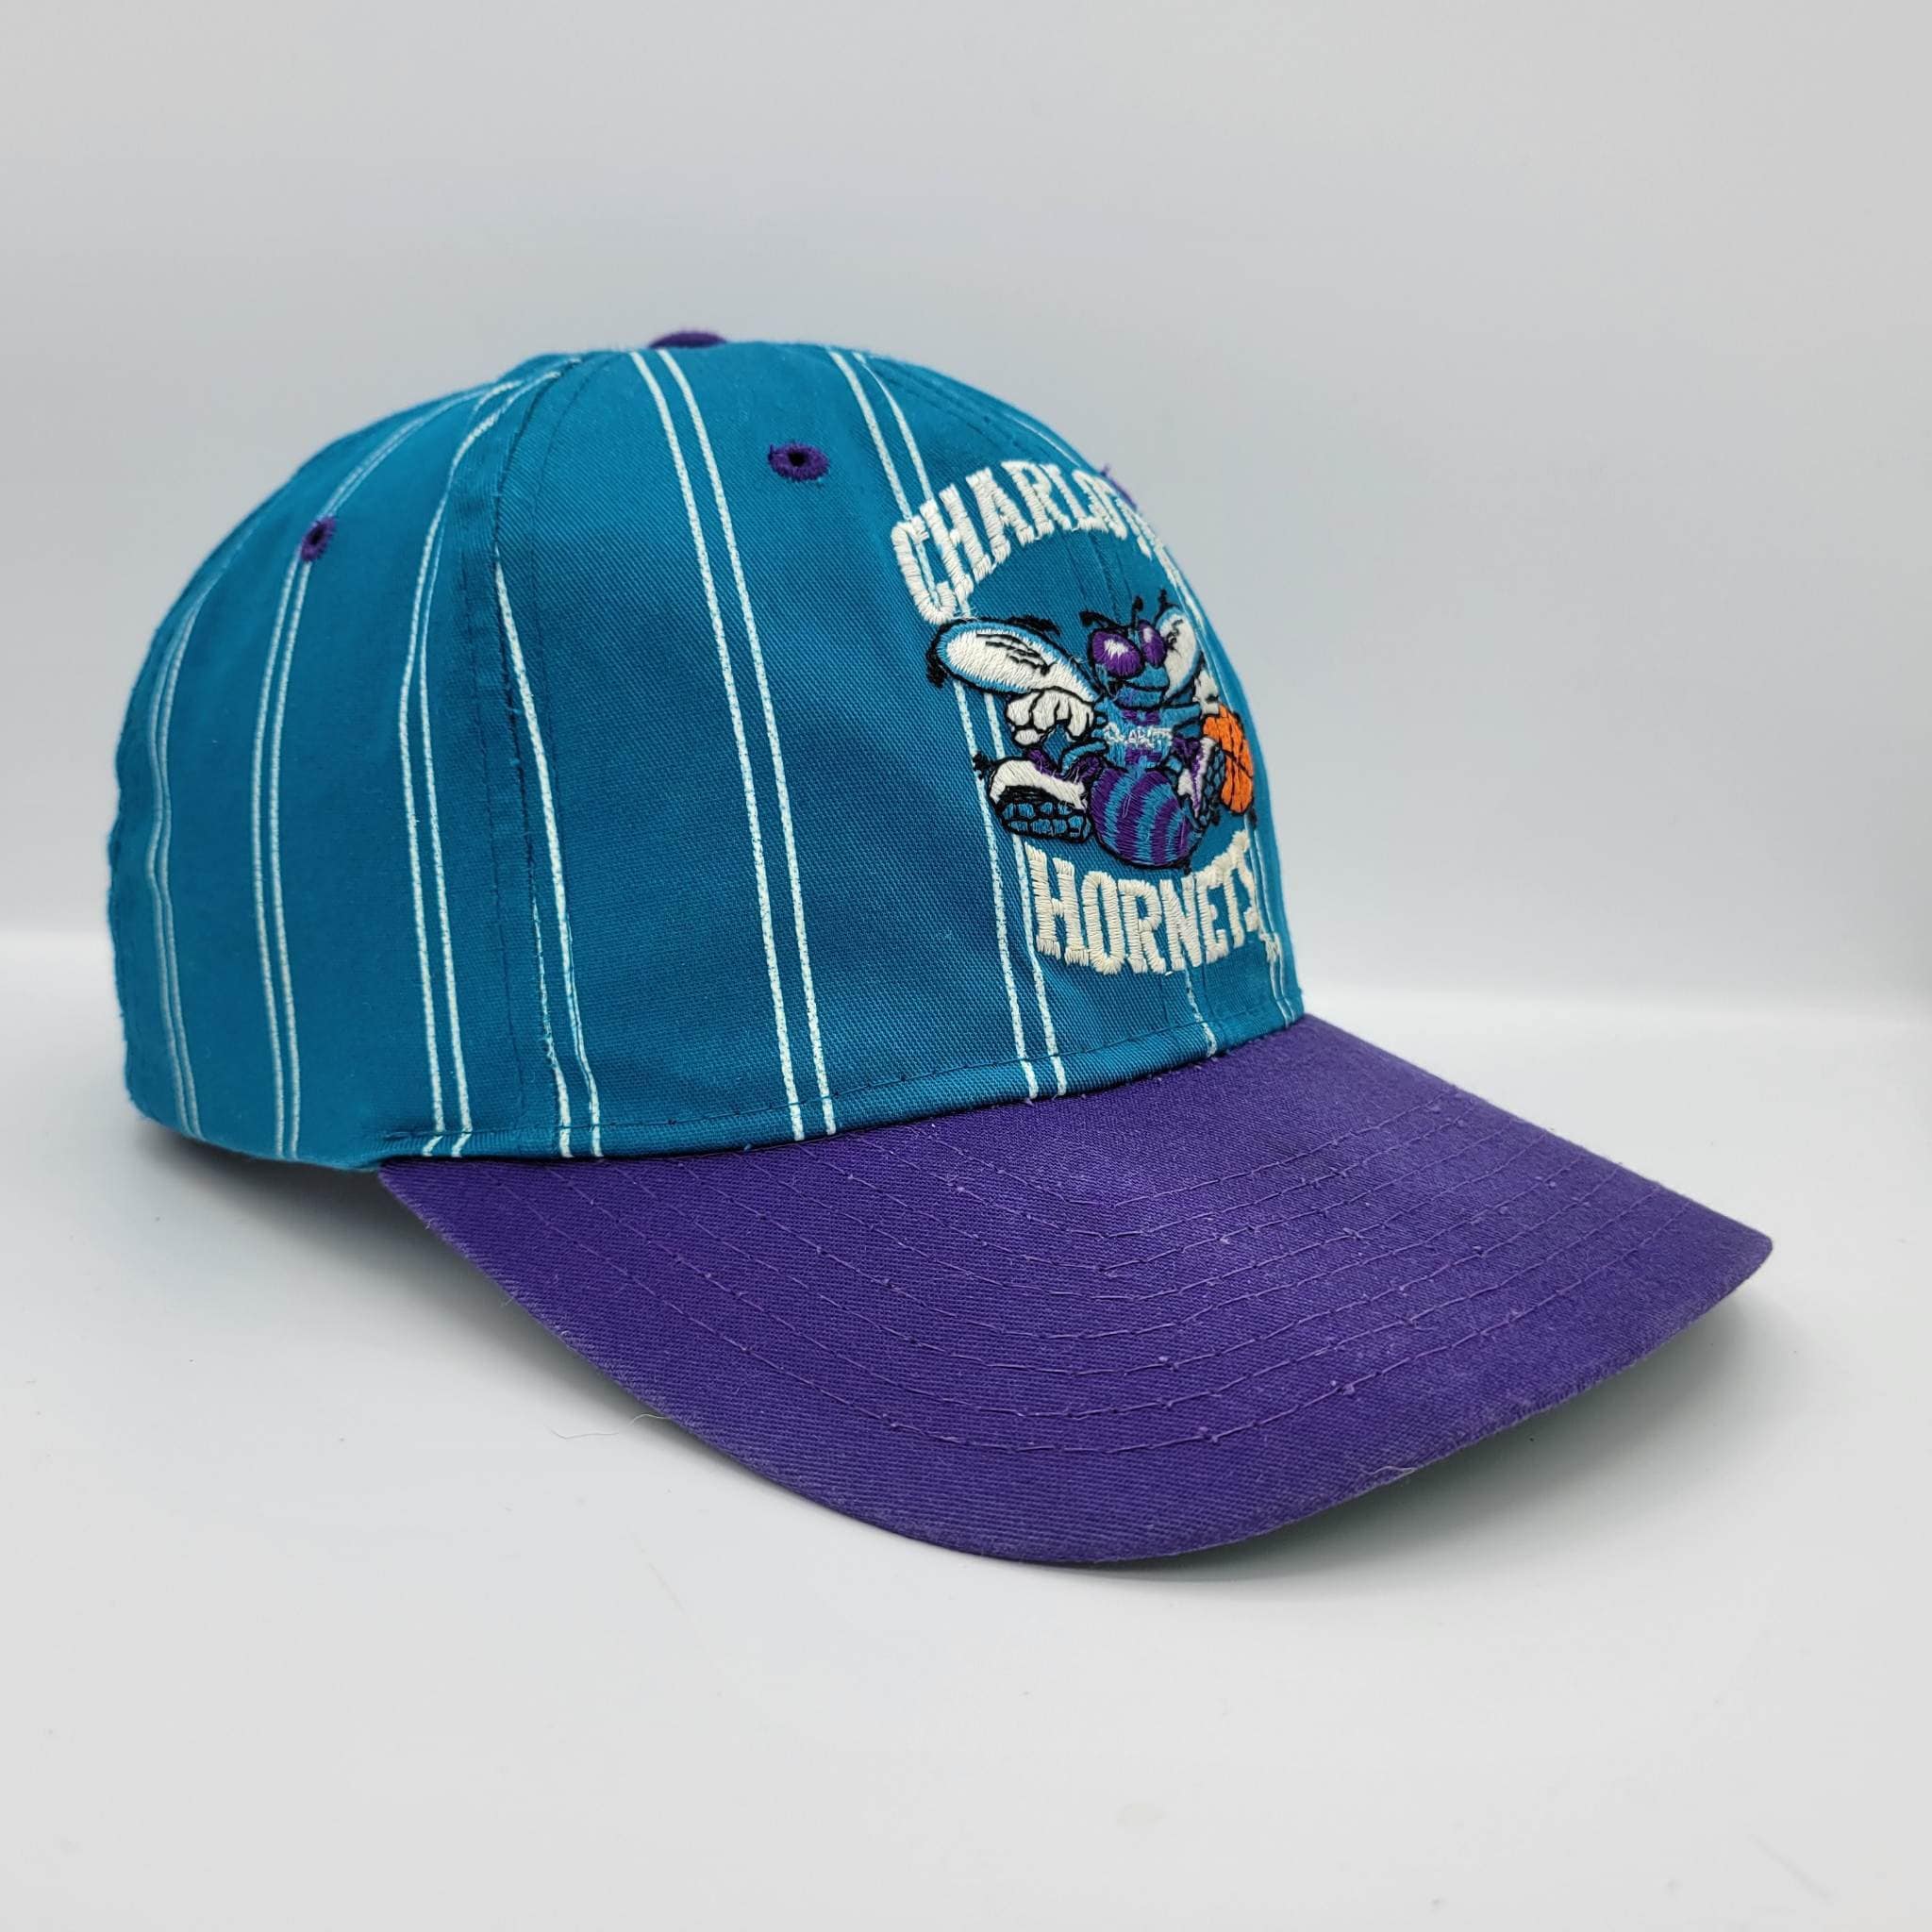 Charlotte Hornets PIN-SCRIPT Black-Teal Fitted Hat